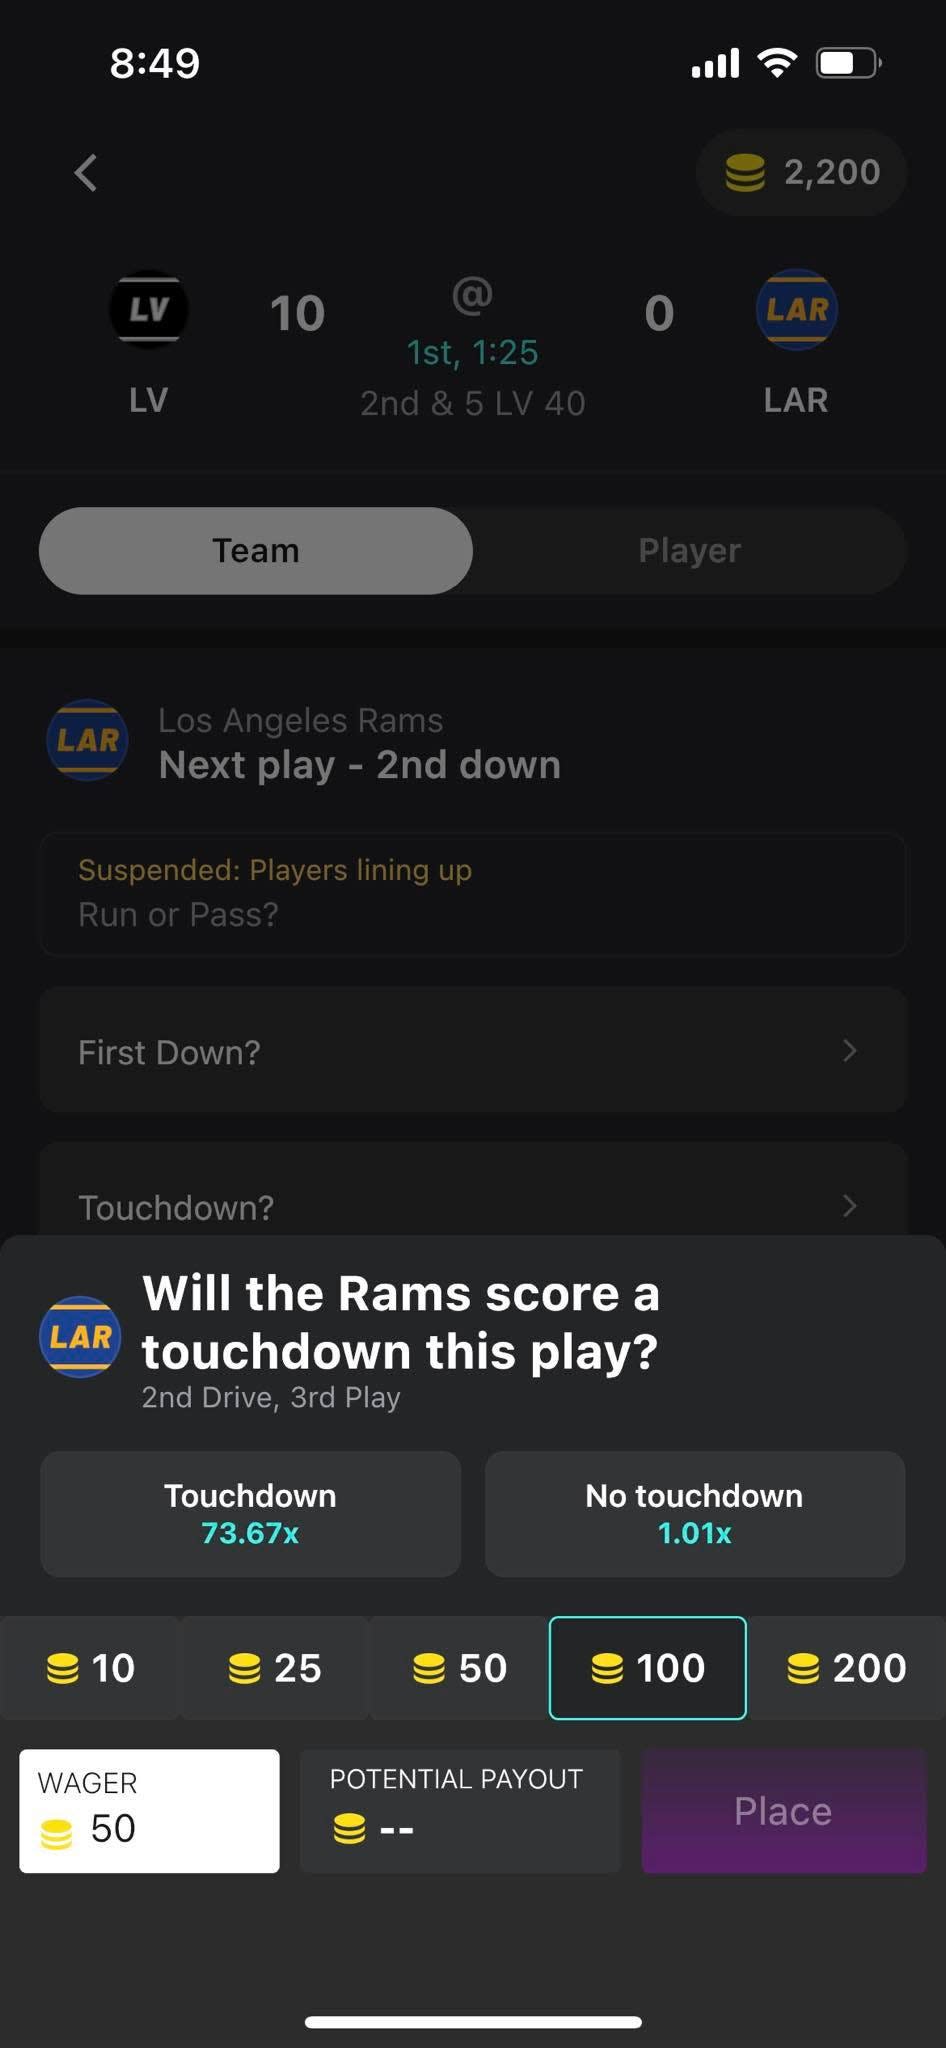 Betr, a mobile sports gaming app, allows micro-betting on individual plays in pro sports, including who scores the next touchdown or whether next play will be a pass or run. The Hall of Fame Village in Canton is the license holder of the mobile app.